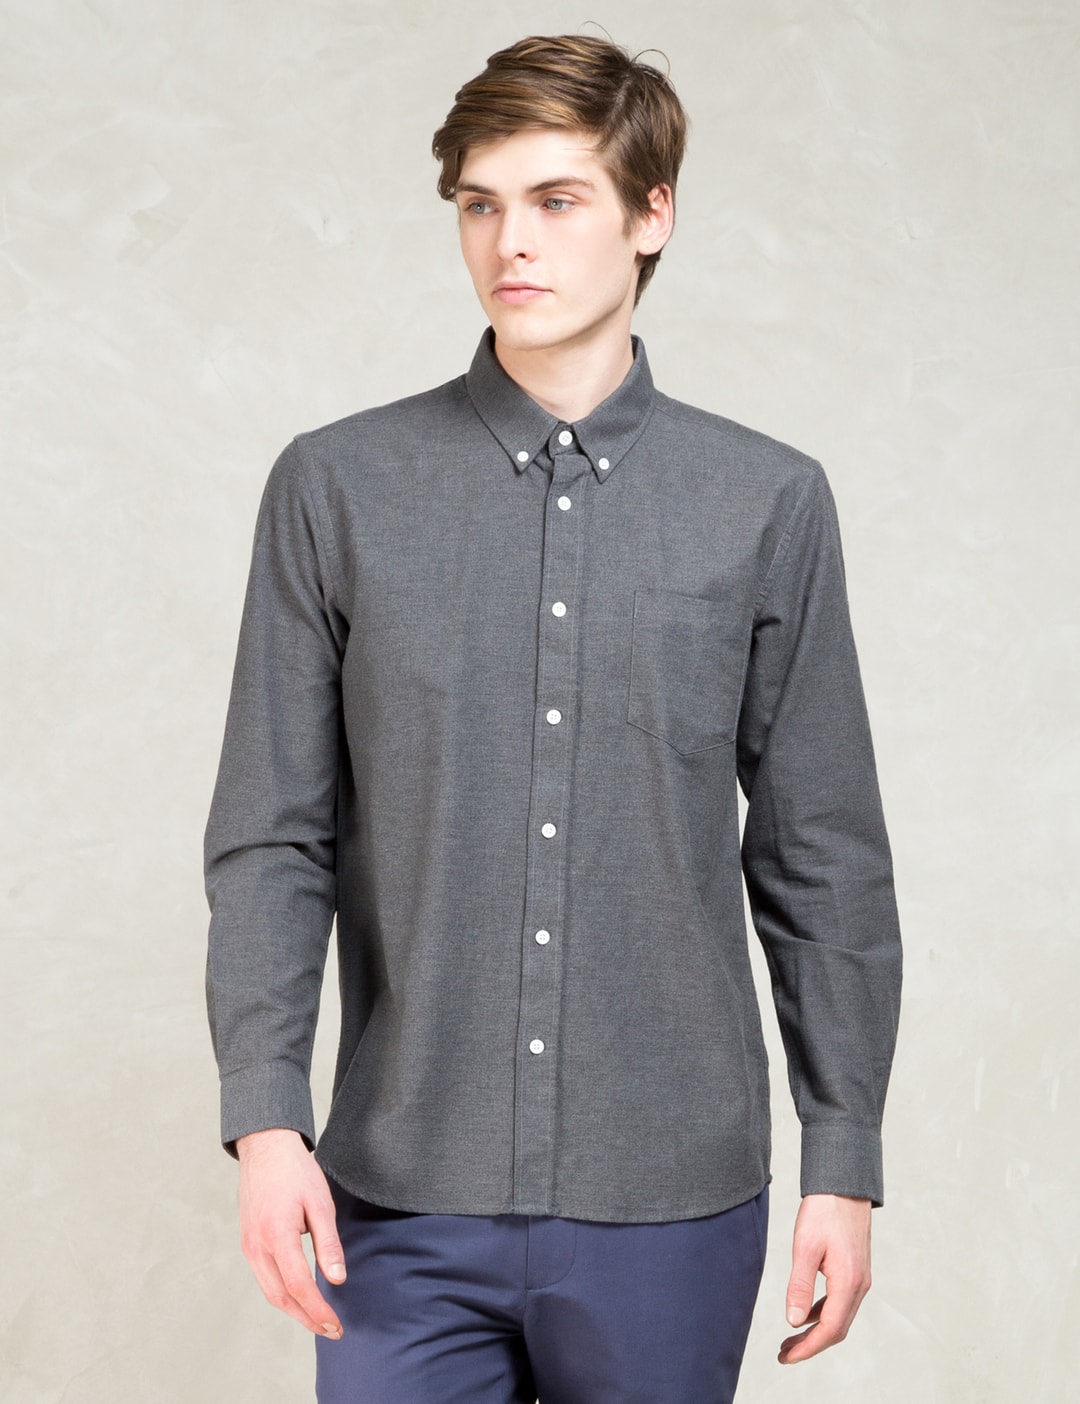 Saturdays Nyc - Charcoal Crosby Oxford Shirt | HBX - Globally Curated ...